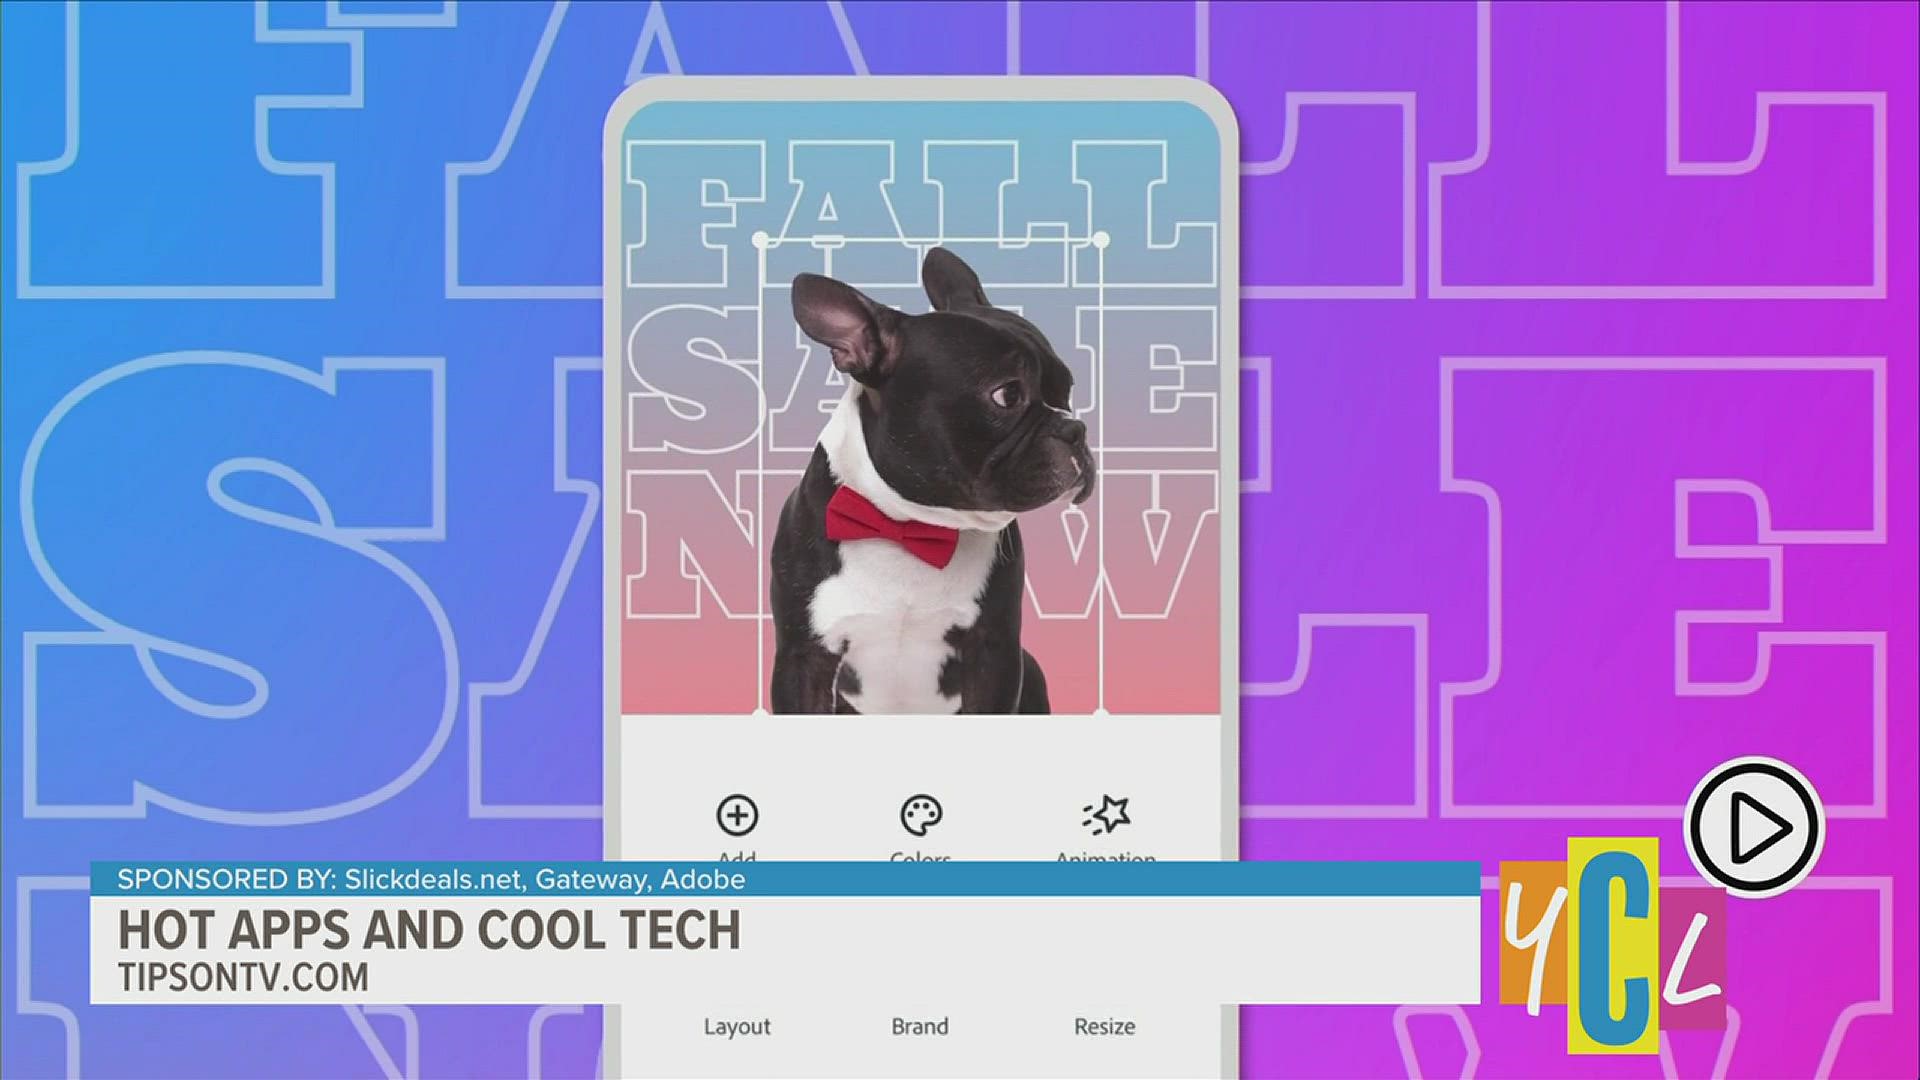 Check out hot apps and cool tech meant for back to school and in the office. This segment paid for by Slickdeals.net, Gateway, Adobe.